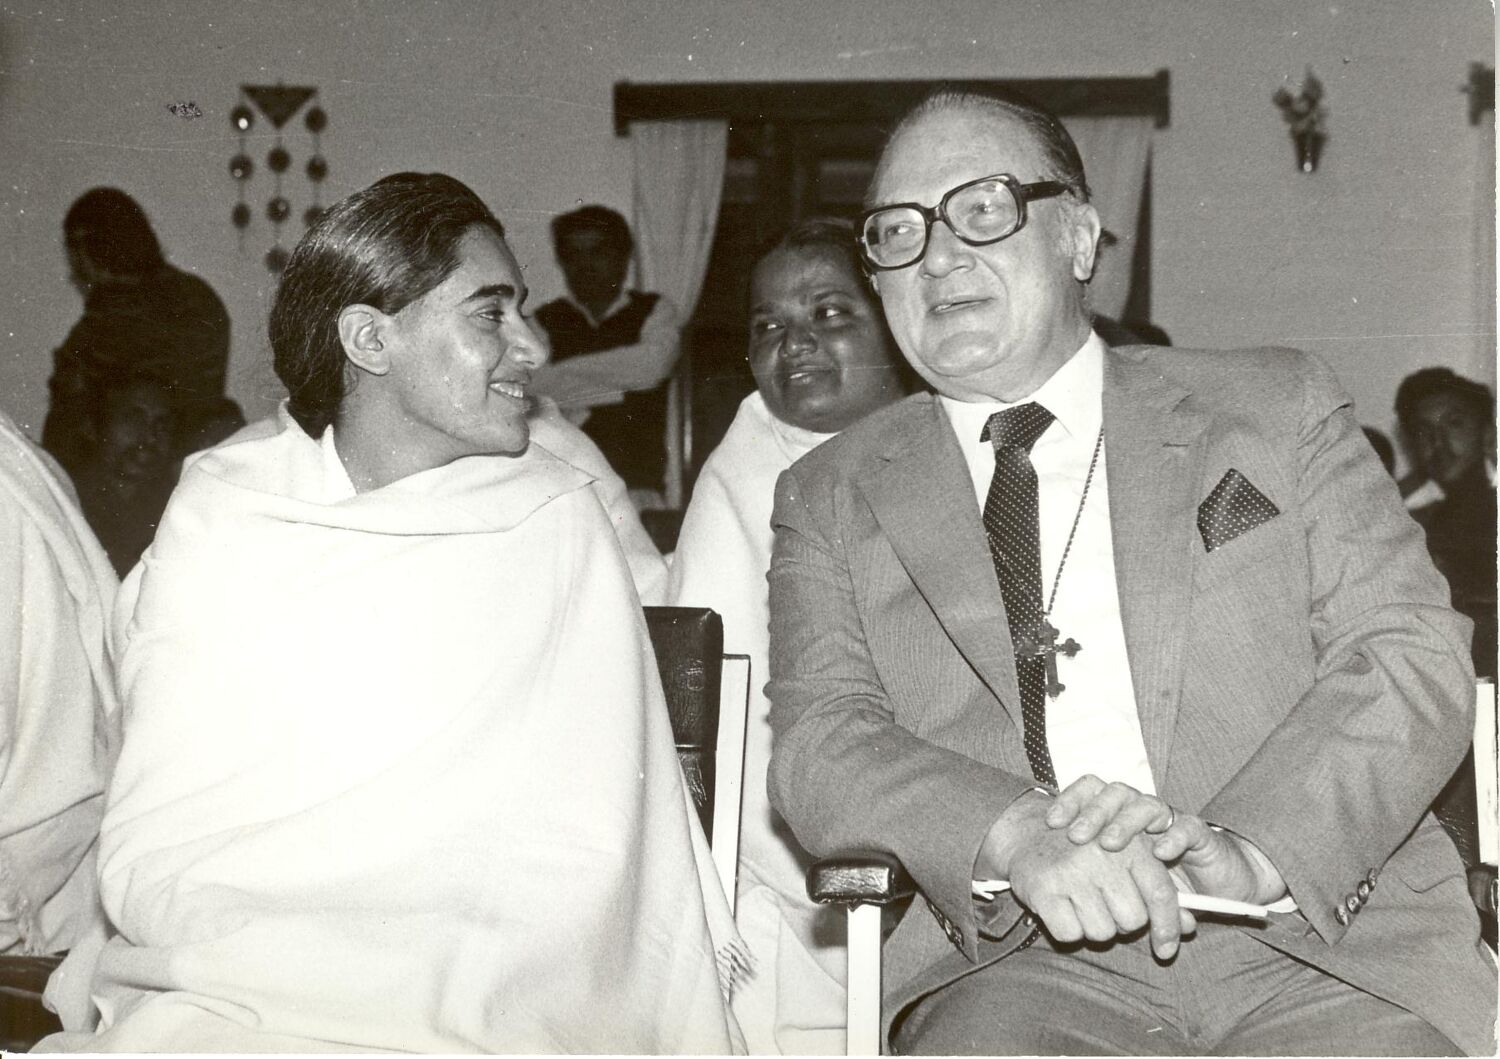 Robert Mueller, Assistant Secretary General of the United Nations, with Sister Jayanti at the opening of The Brahma Kumaris Om Shanti Bhavan, during the International Peace Conference, Mount Abu, Feb 1983